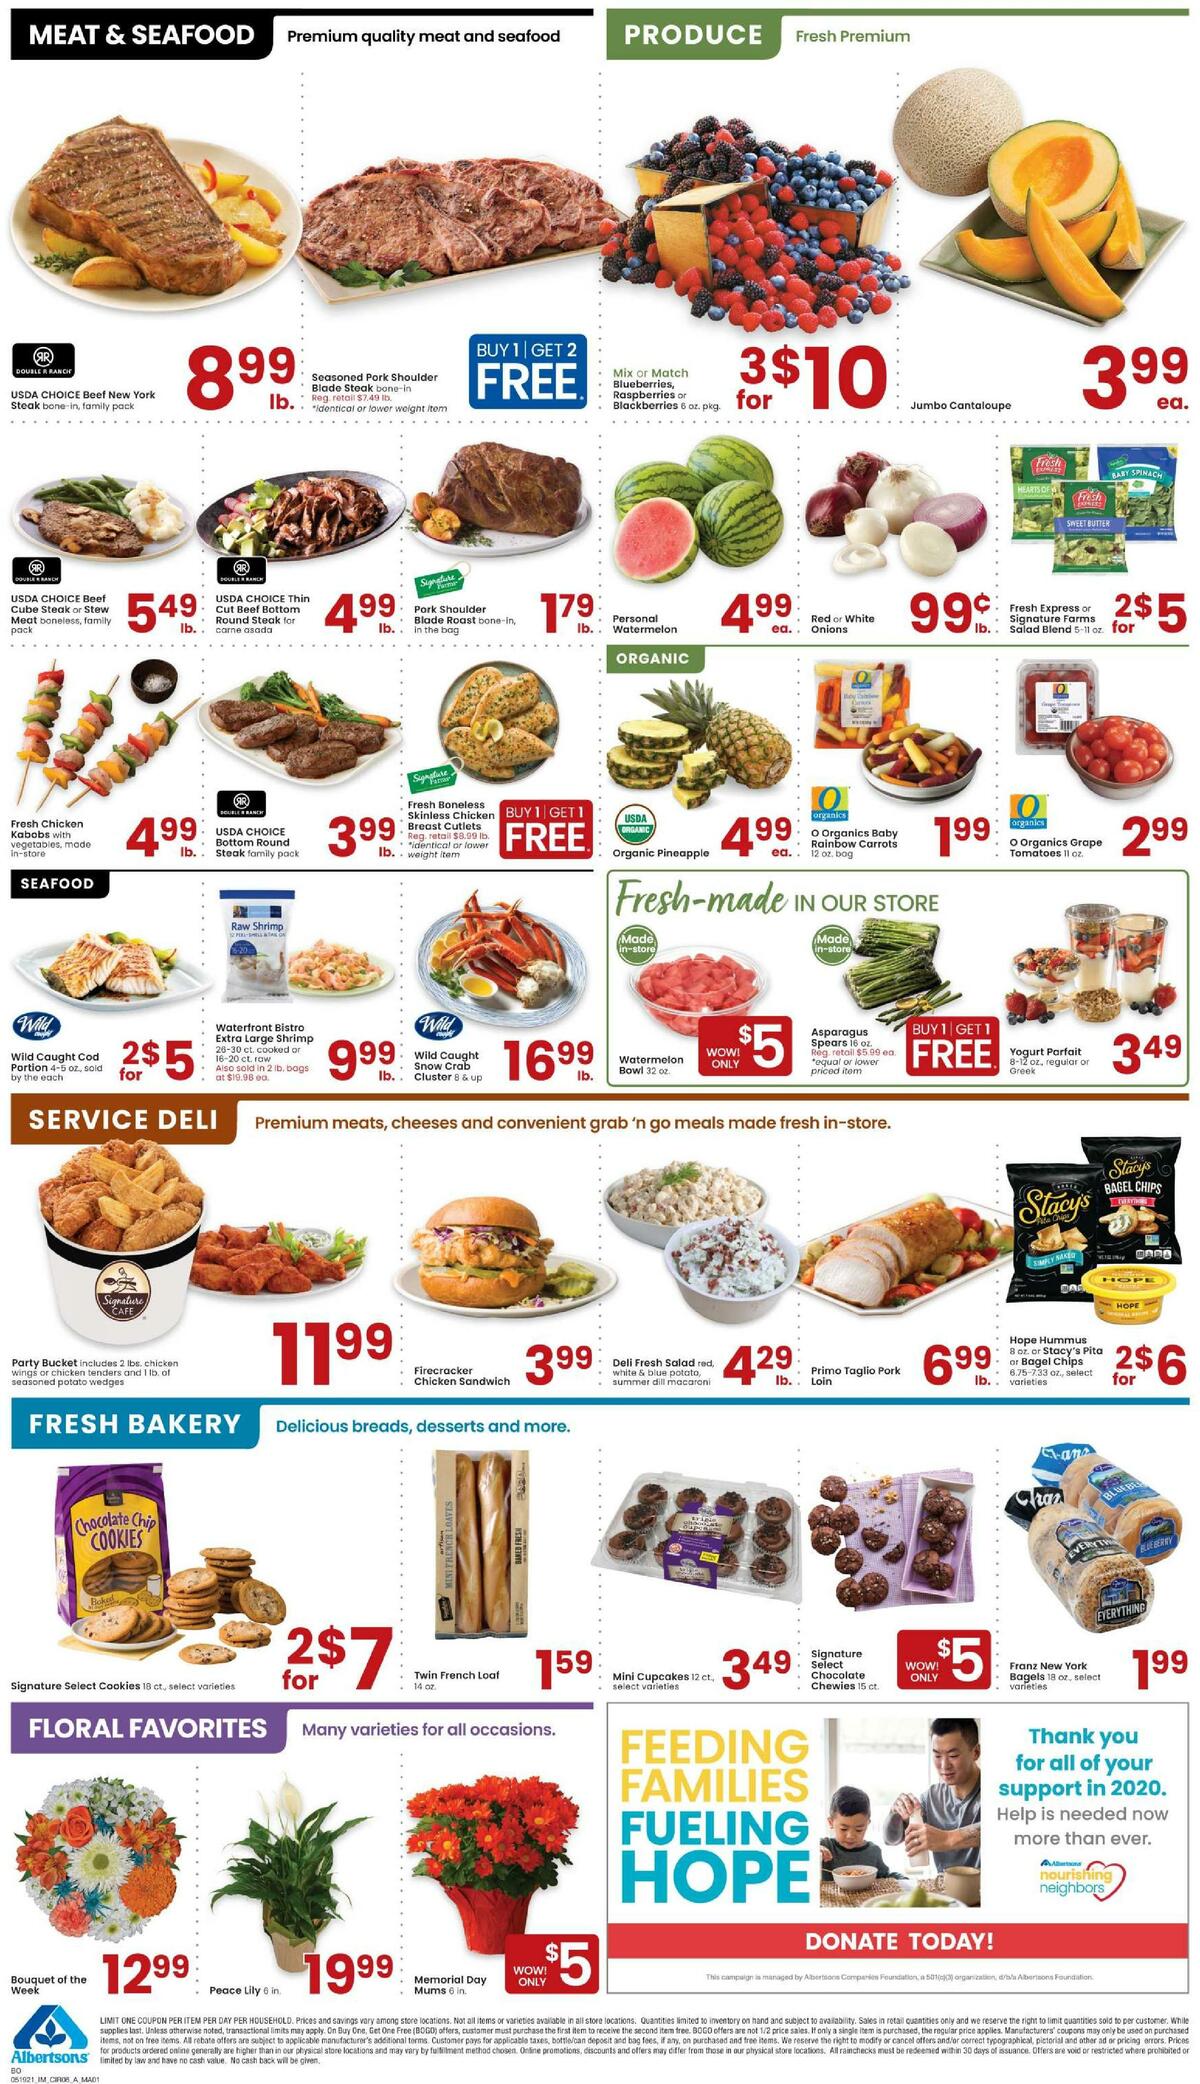 Albertsons Weekly Ad from May 19